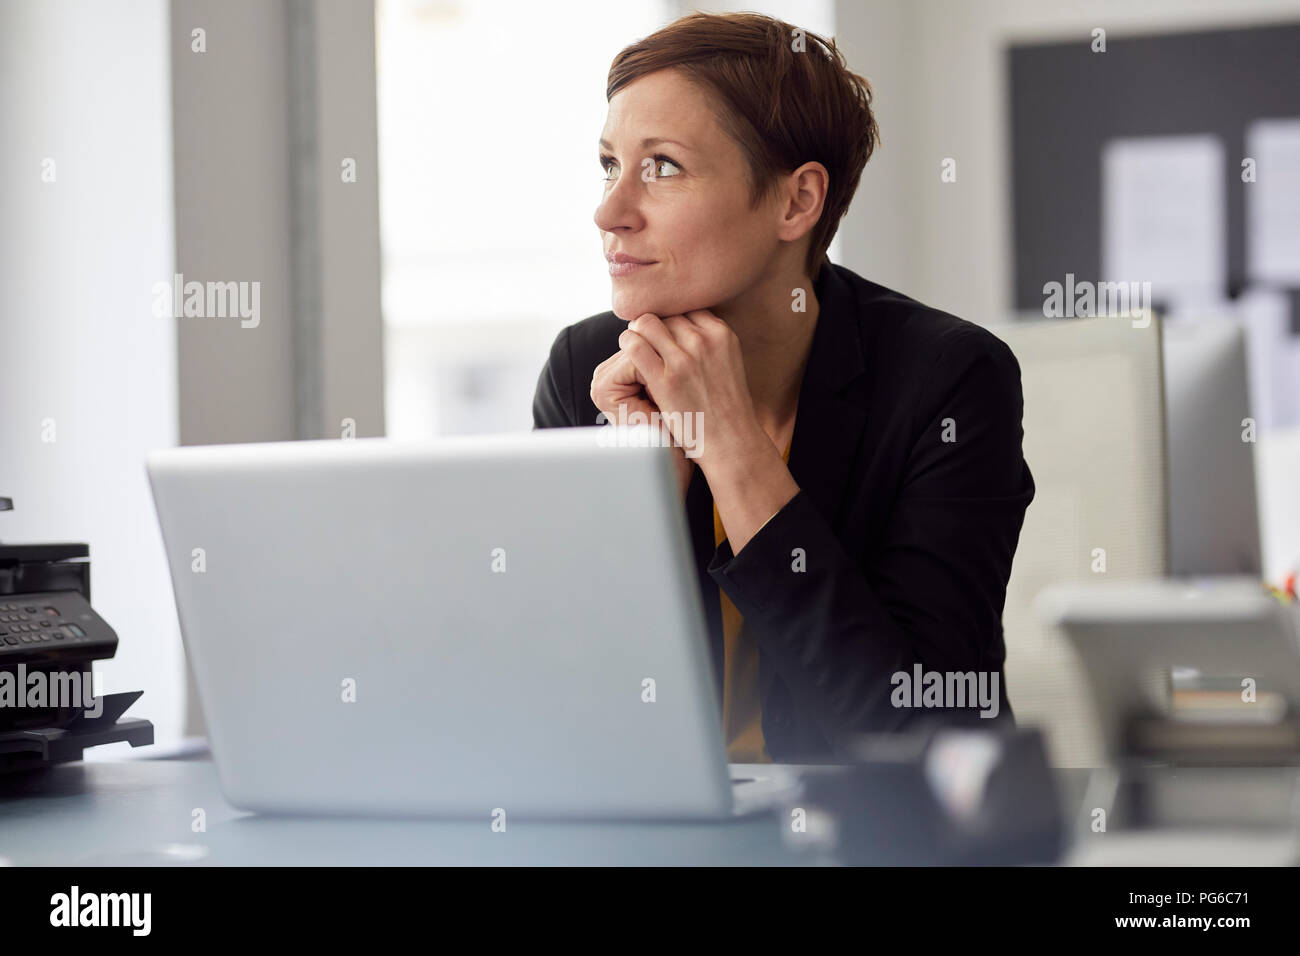 Businesswoman sitting in office, using laptop Stock Photo